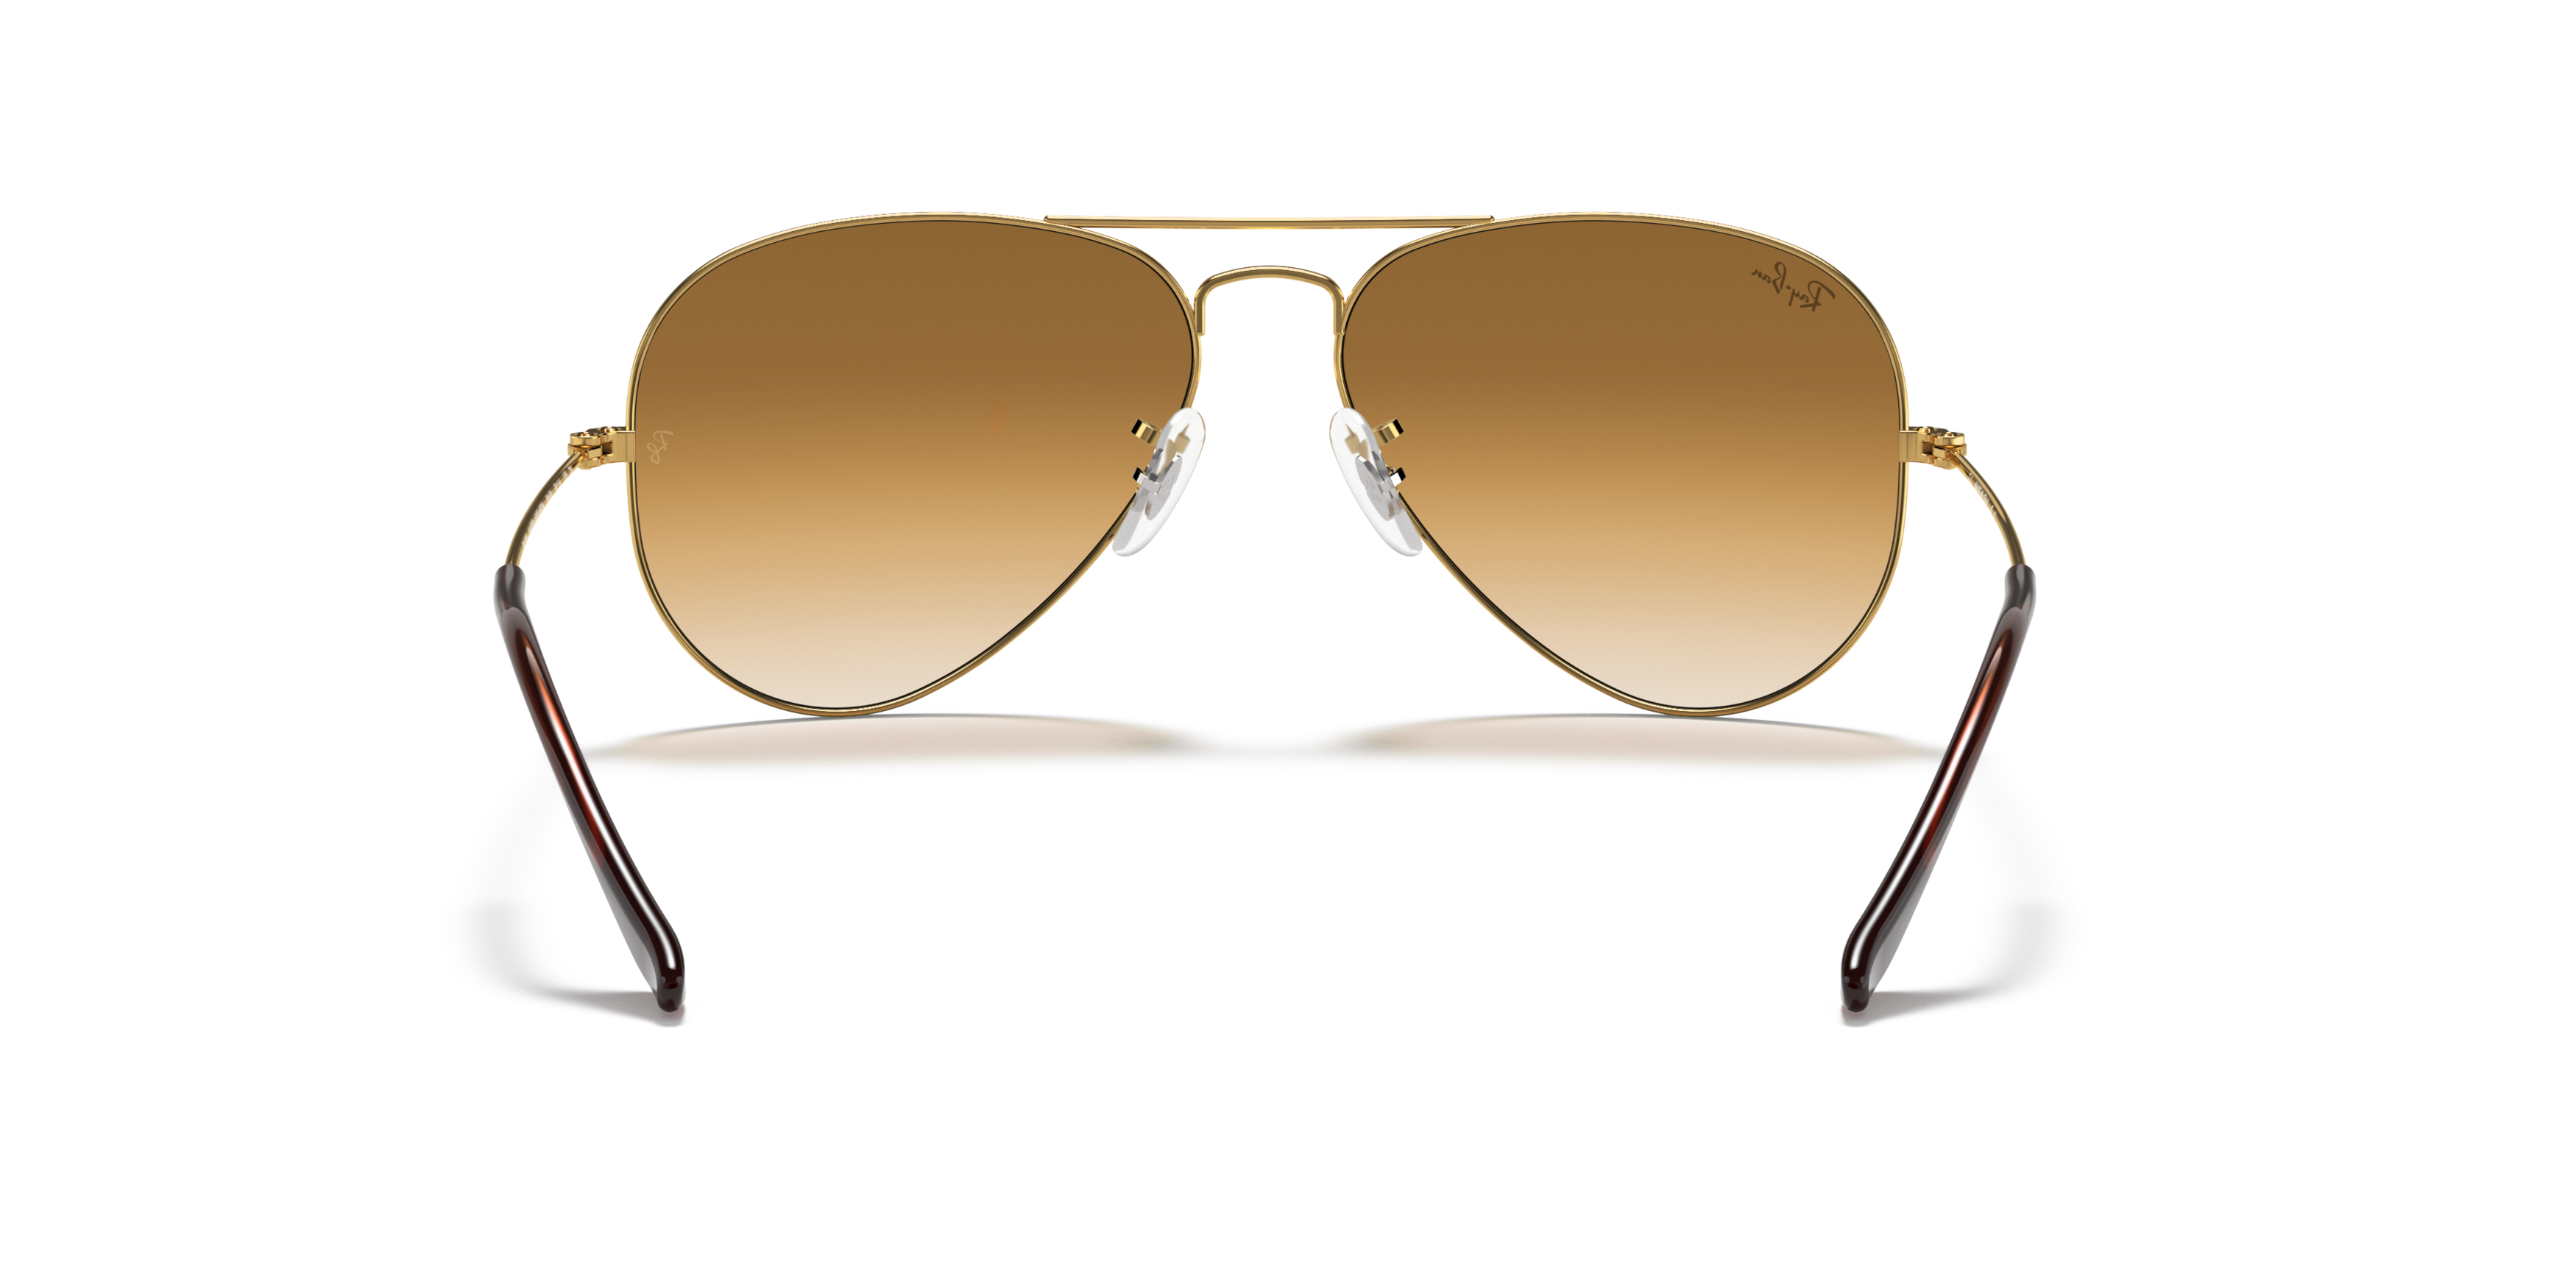 [products.image.detail02] RAY-BAN RB3025 001/51